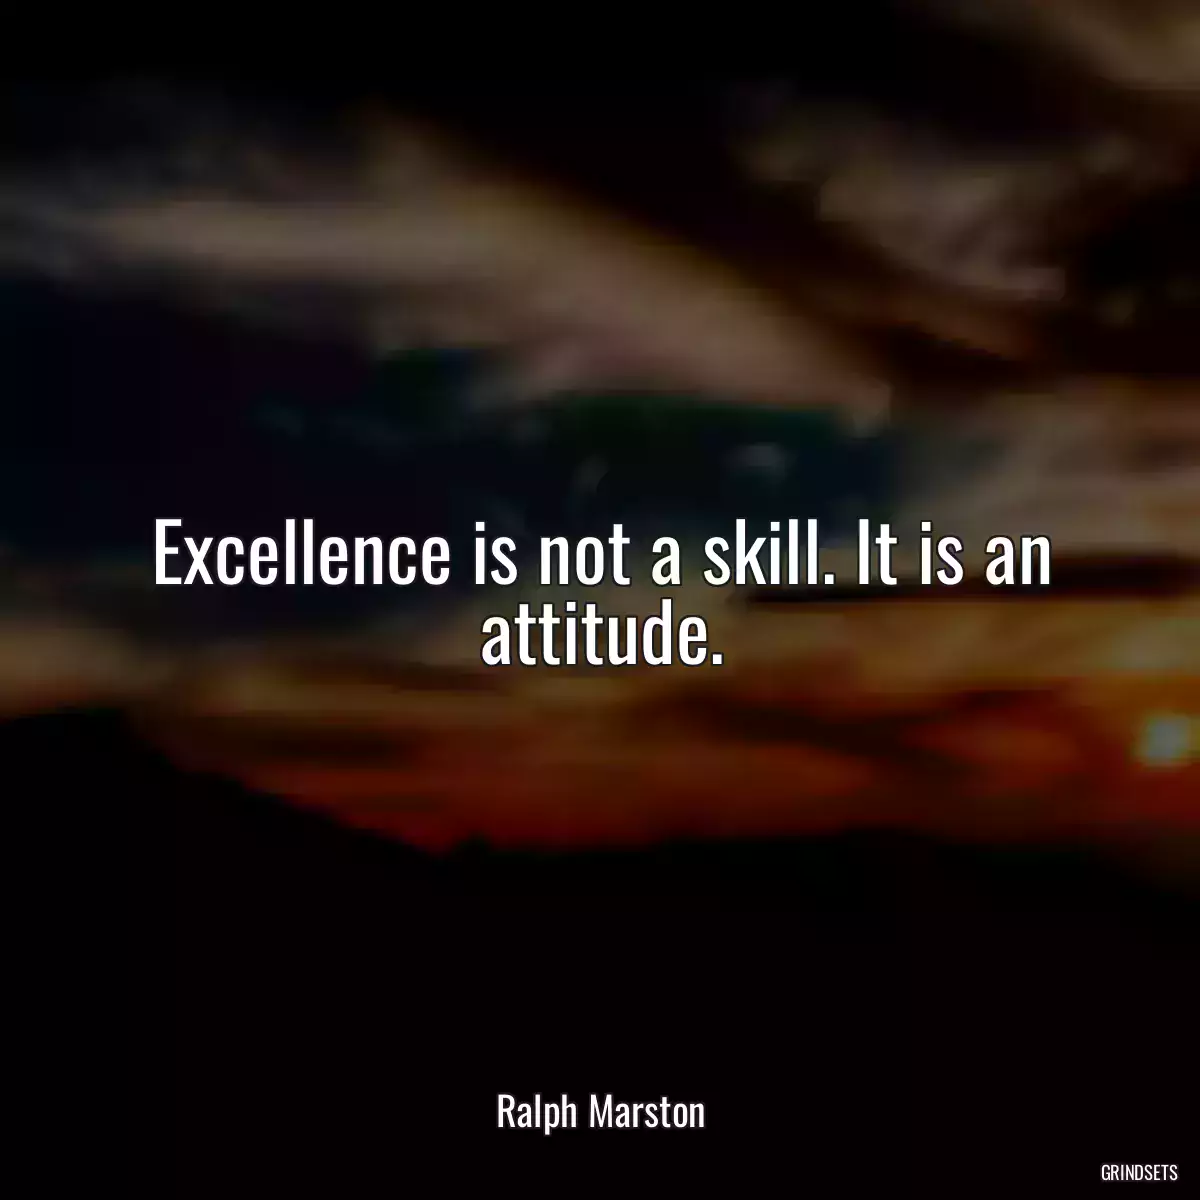 Excellence is not a skill. It is an attitude.